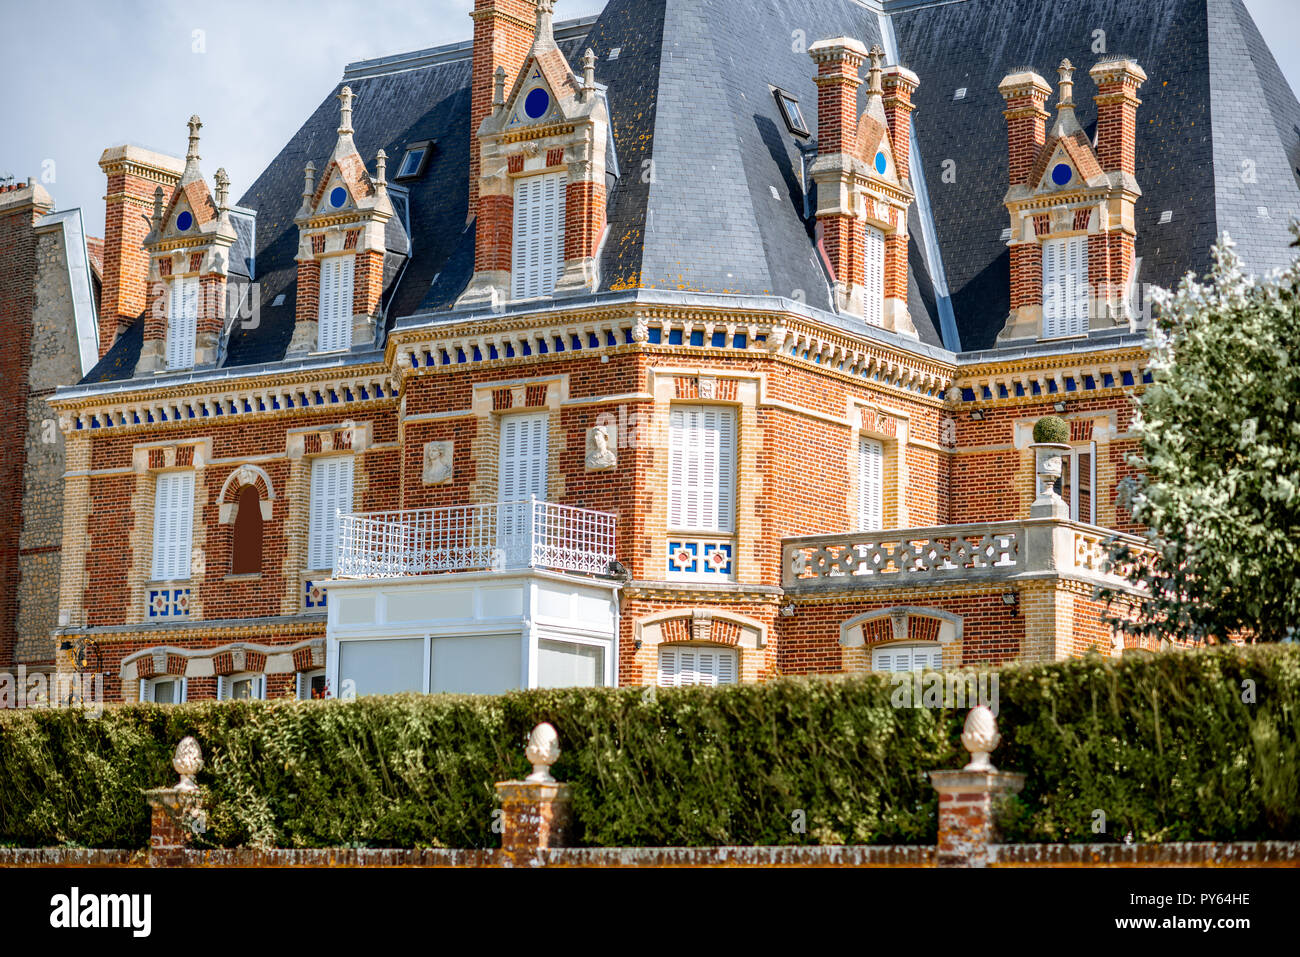 Luxury buildings on the coastline of Trouville, famous french resort in Normandy Stock Photo